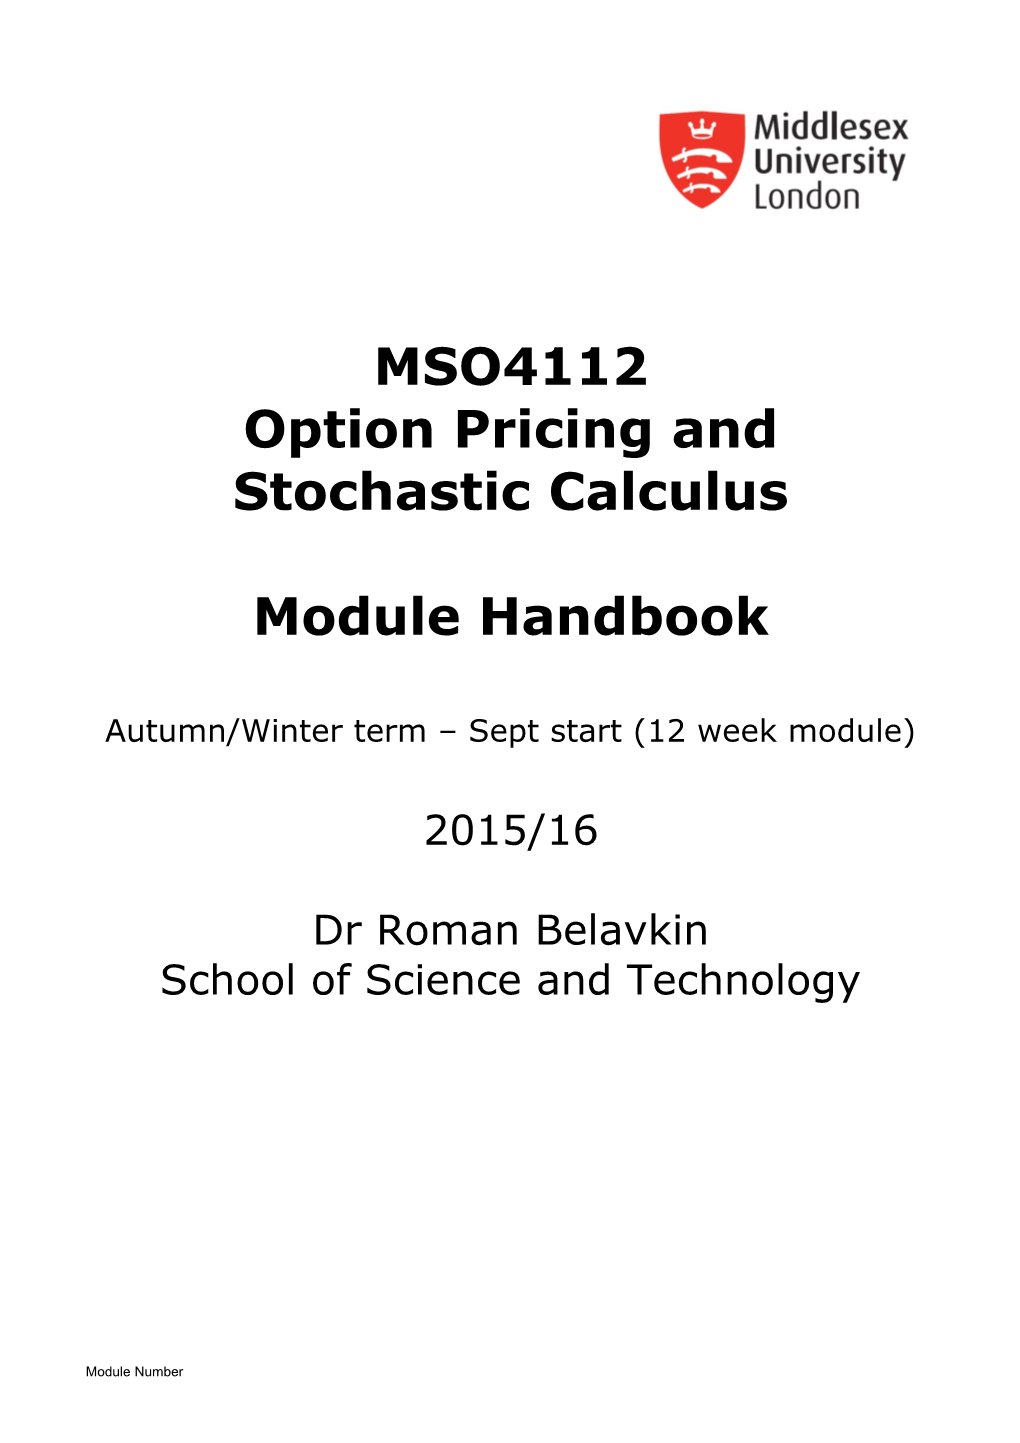 Option Pricing and Stochastic Calculus